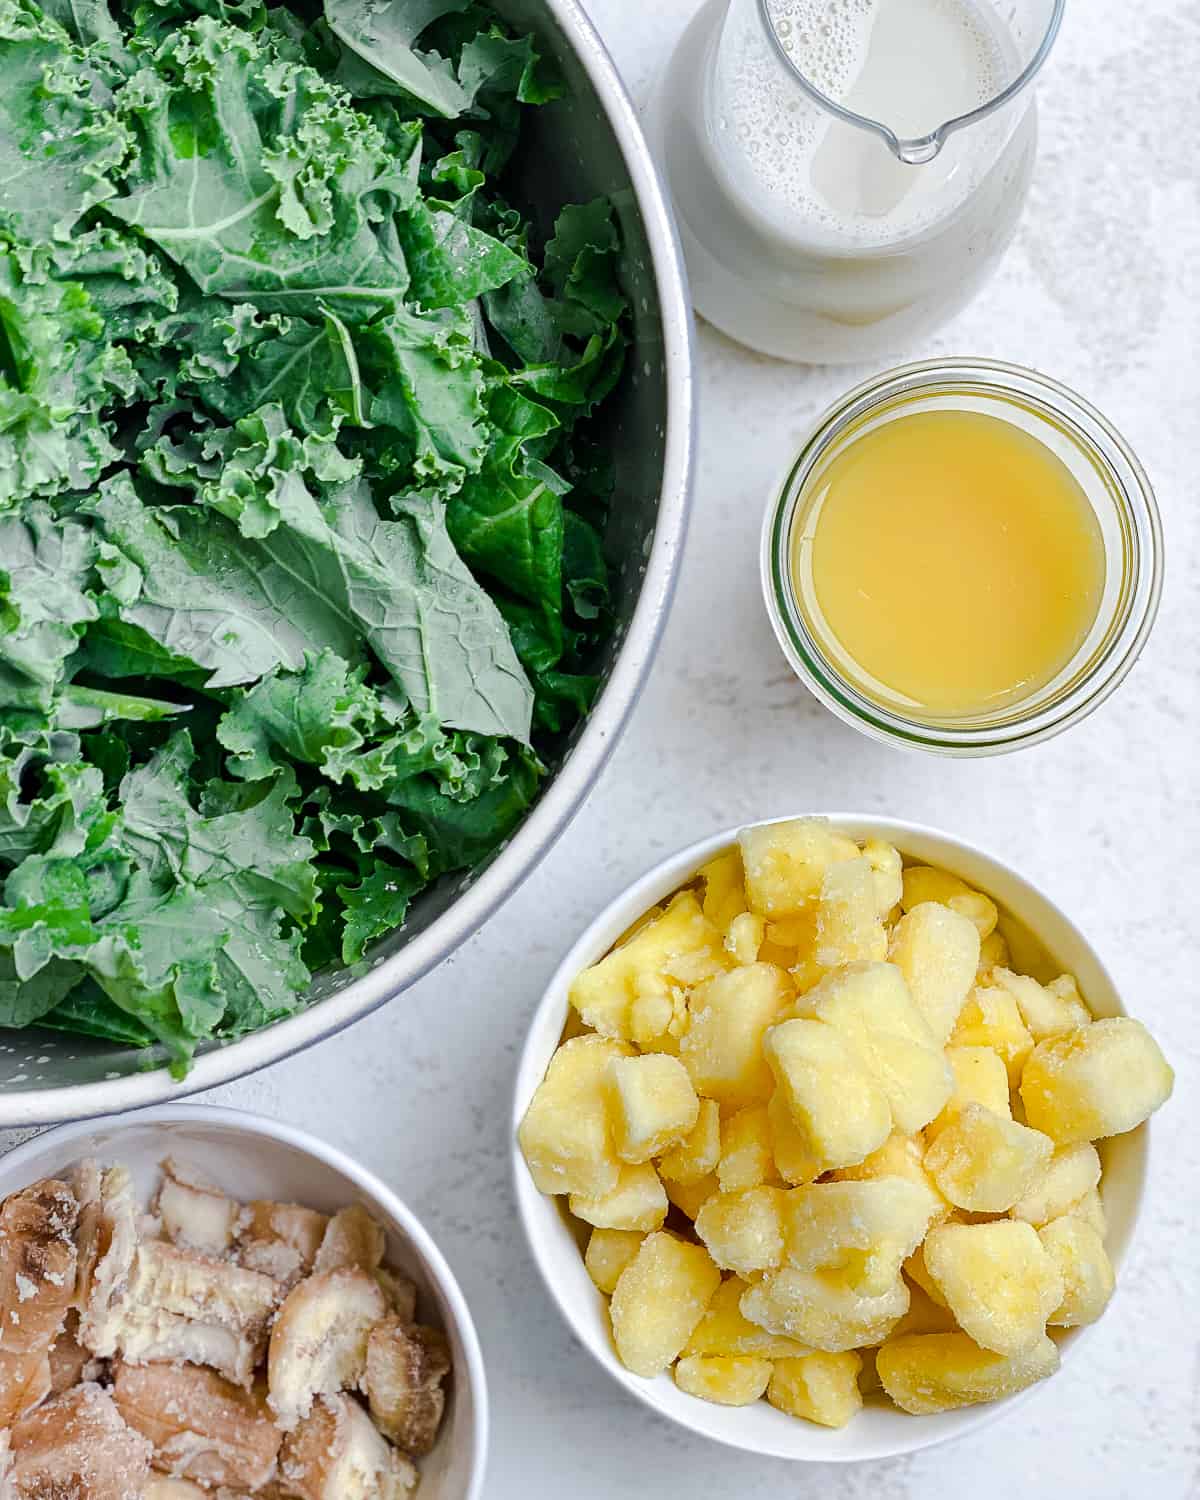 ingredients for Kale Pineapple Smoothie measured out against a white surface